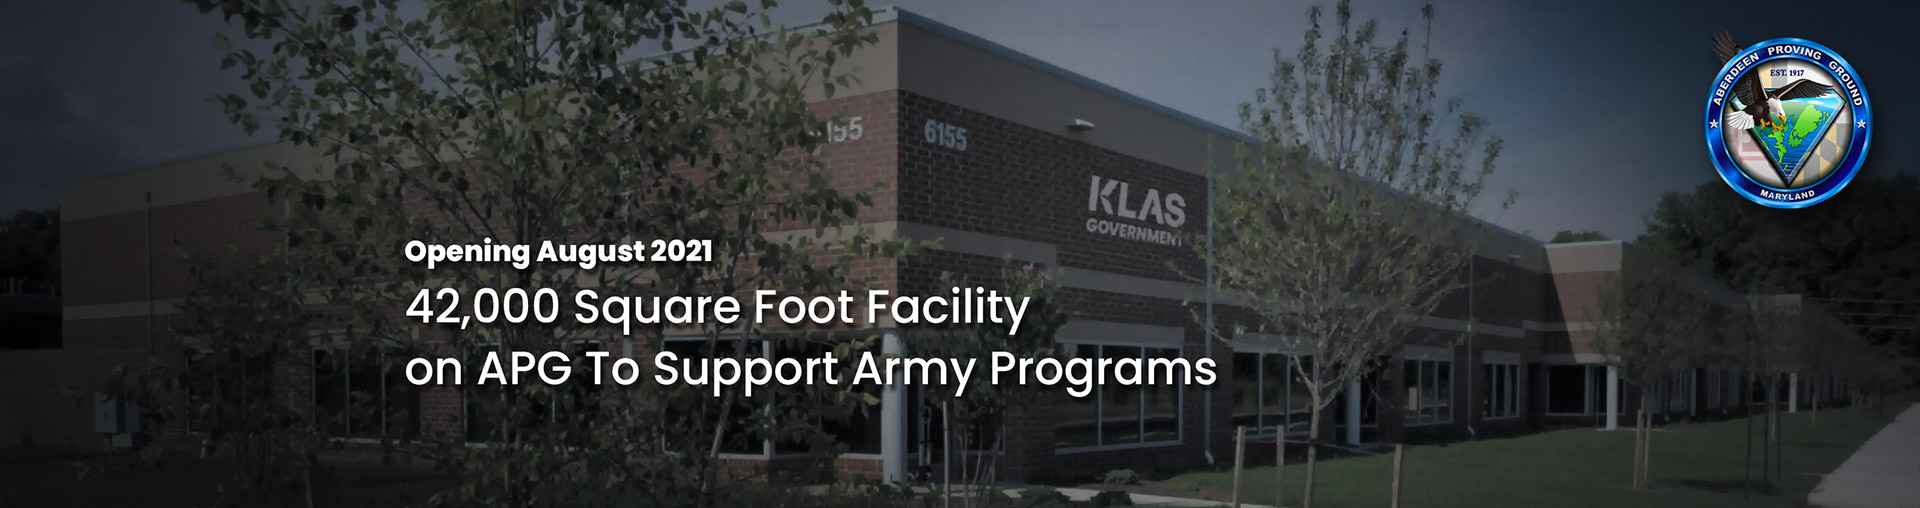 Klas Government Opening August 2021